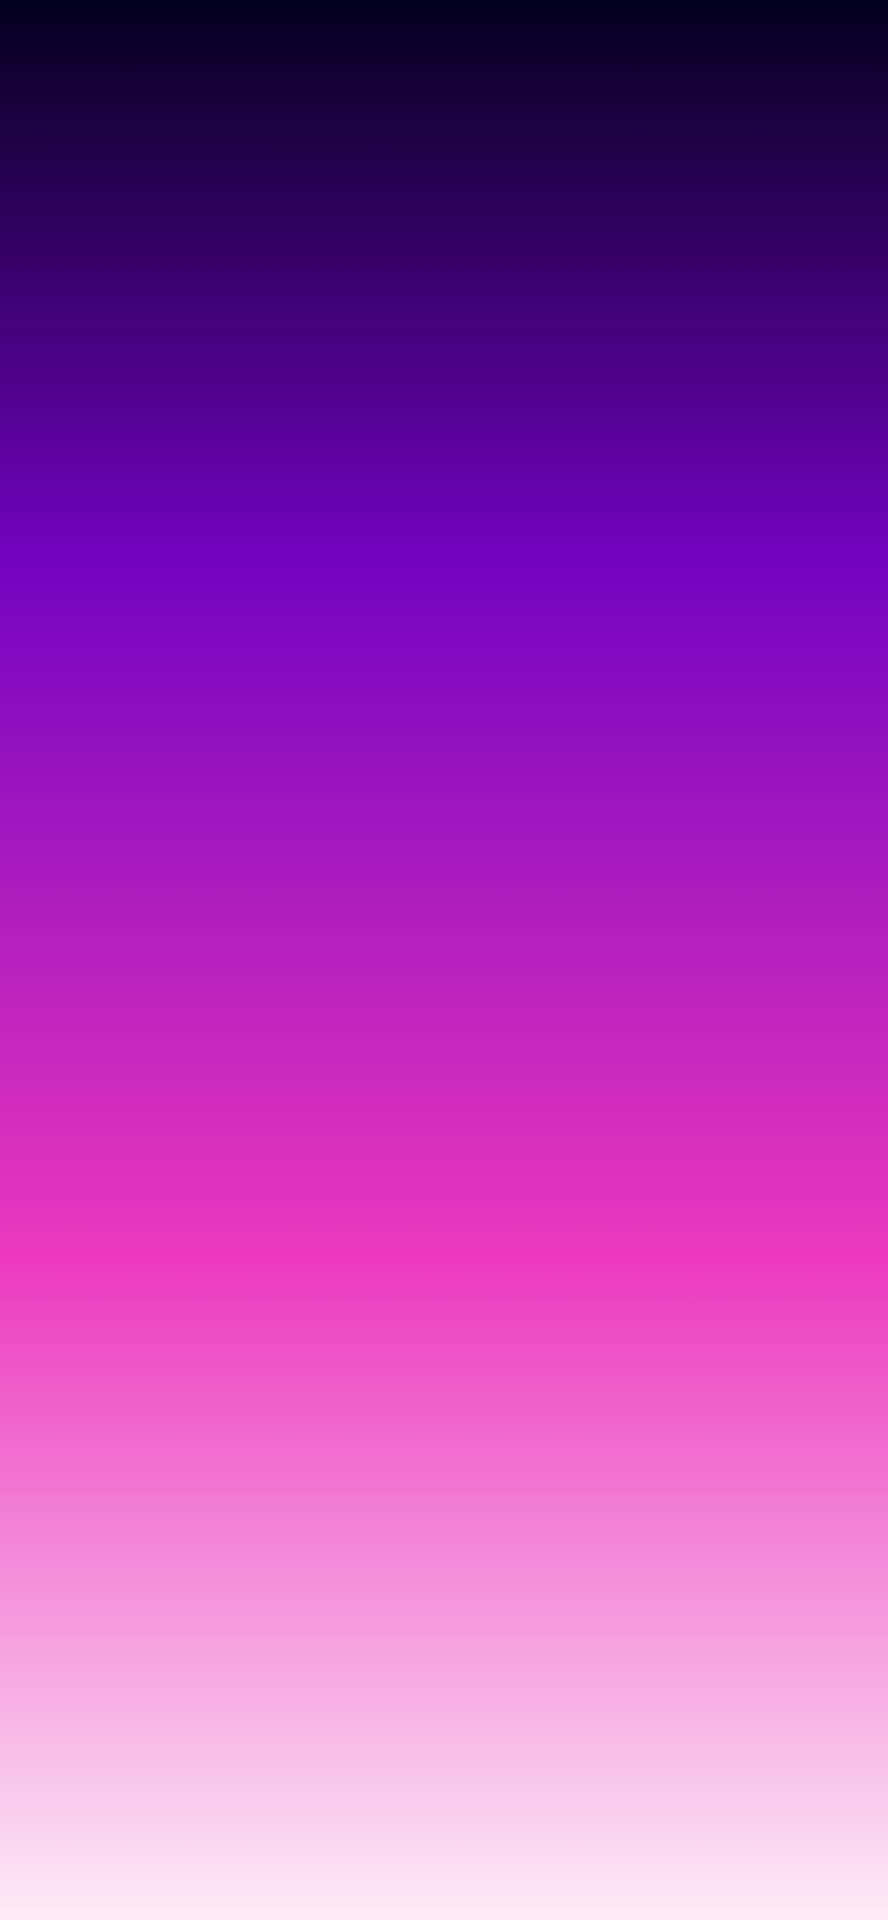 A Purple And Pink Gradient Wallpaper Wallpaper